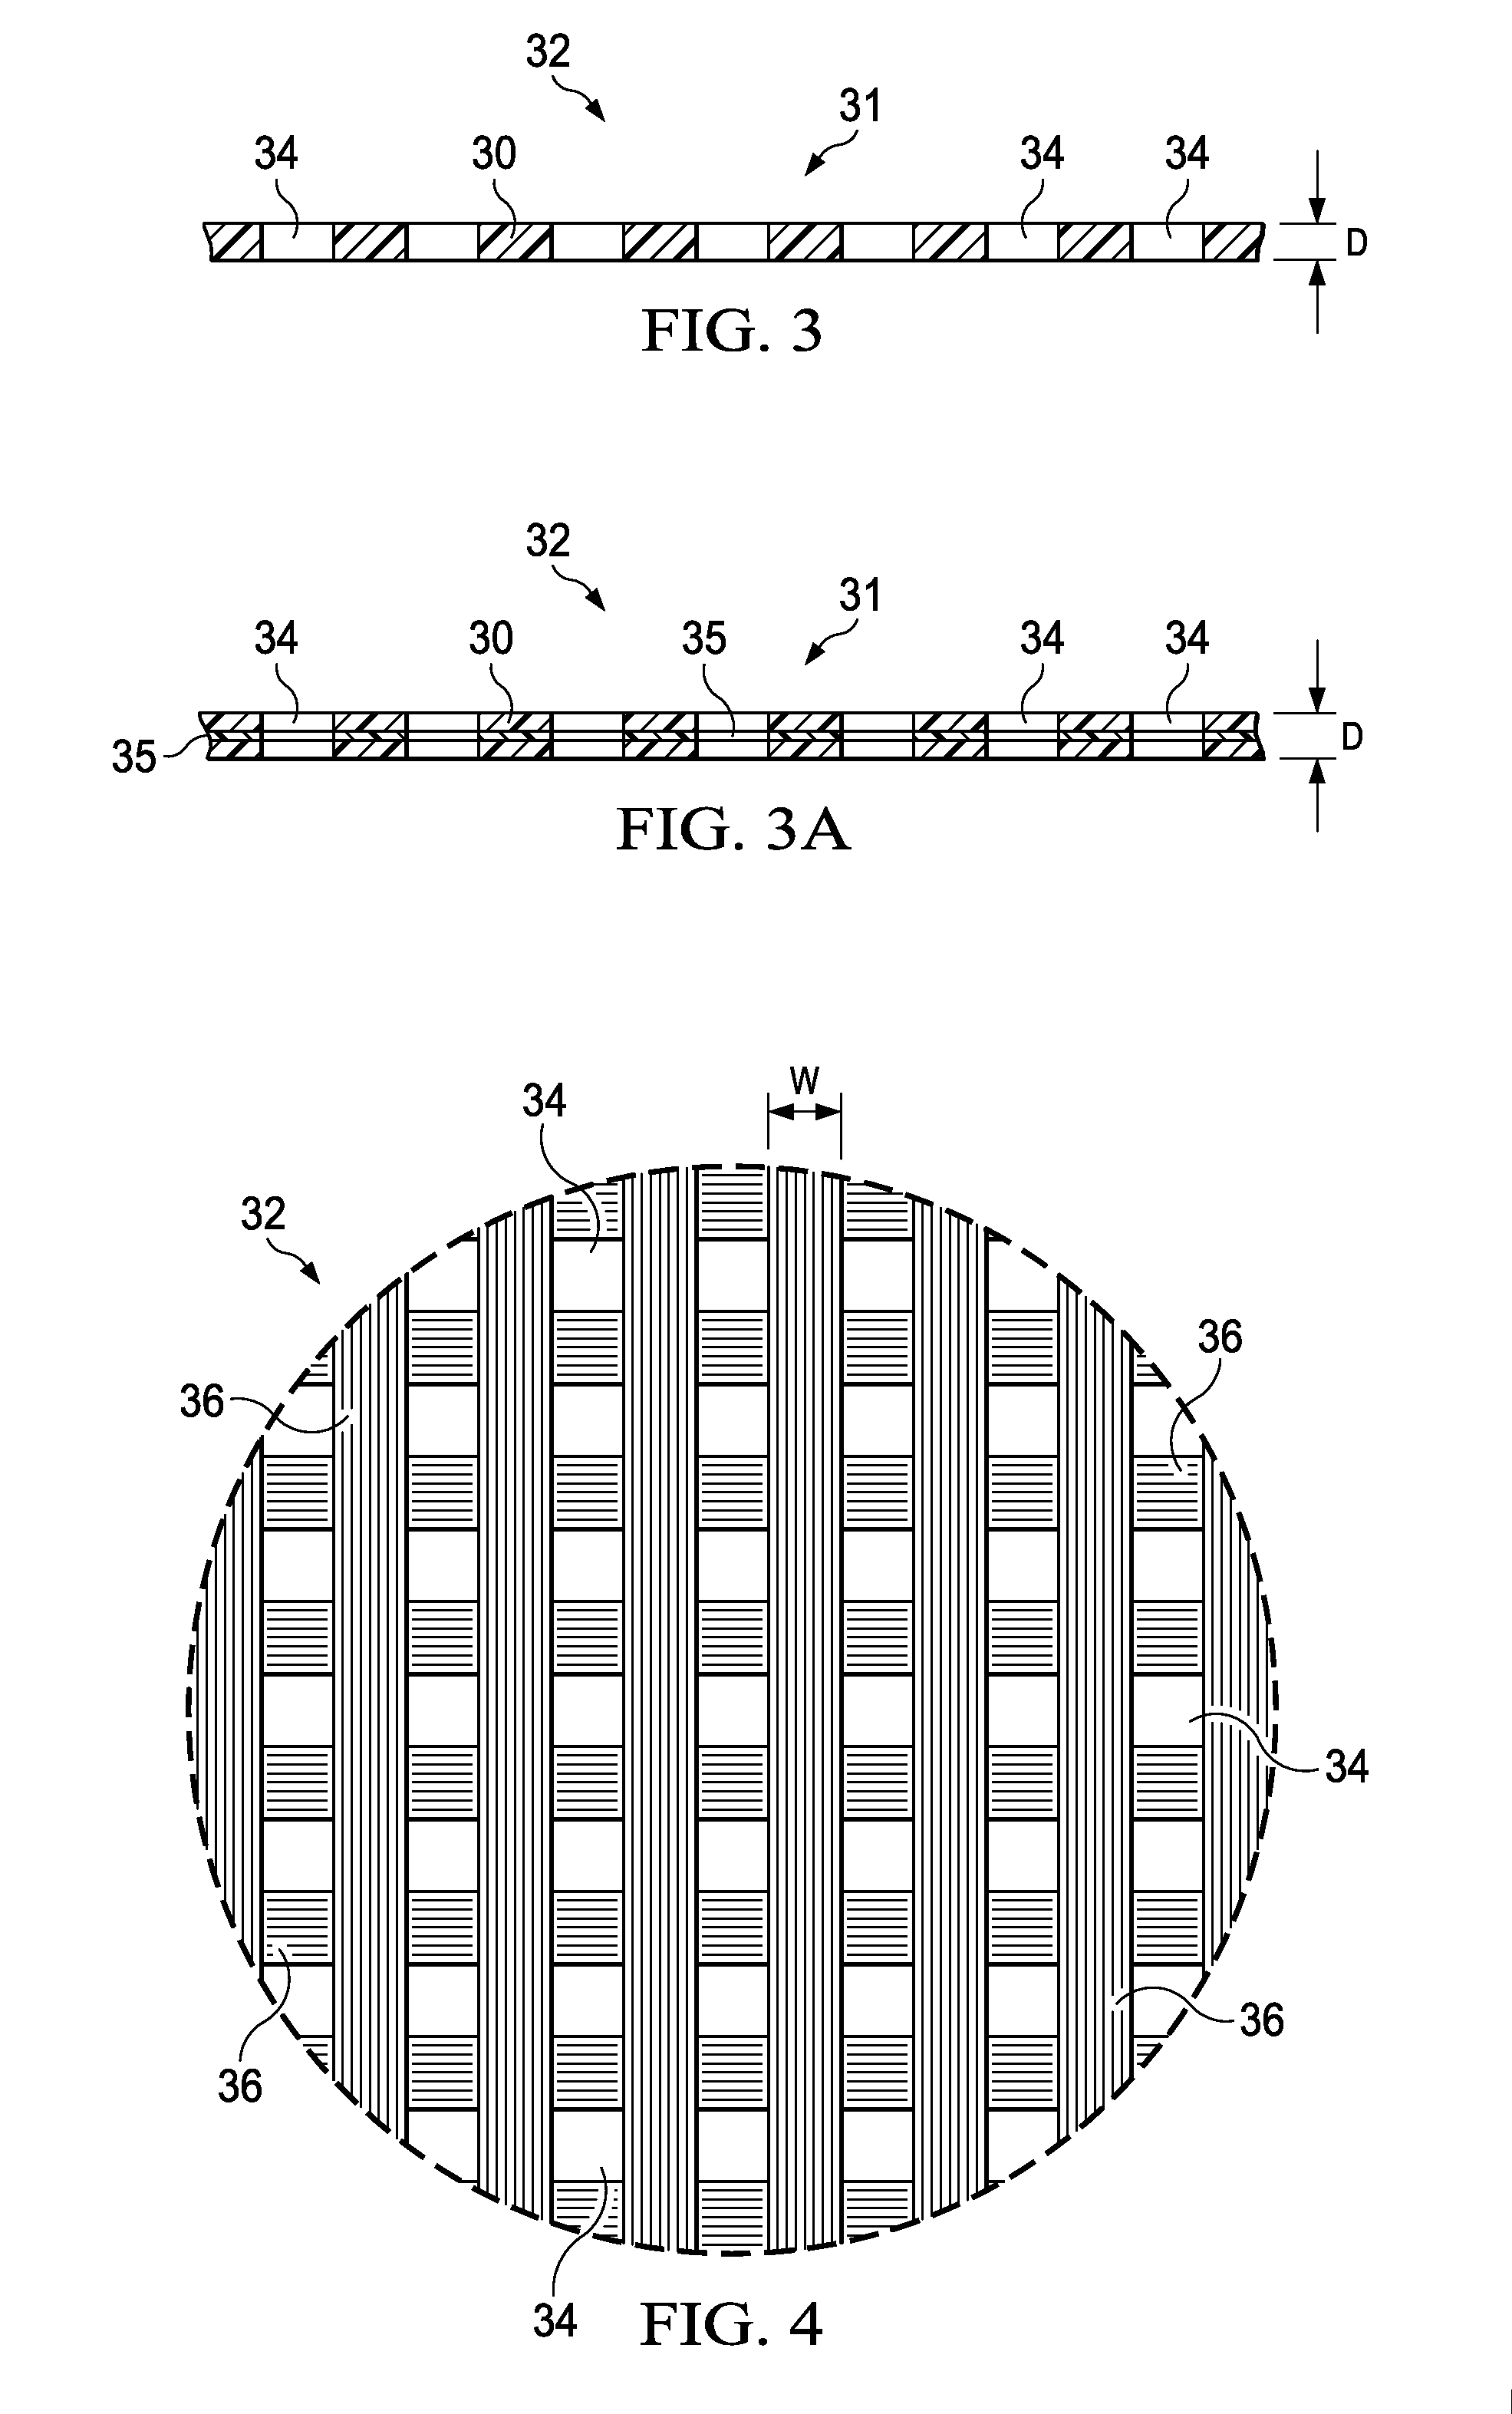 Composite Laminates Having Hole Patterns Produced by Controlled Fiber Placement